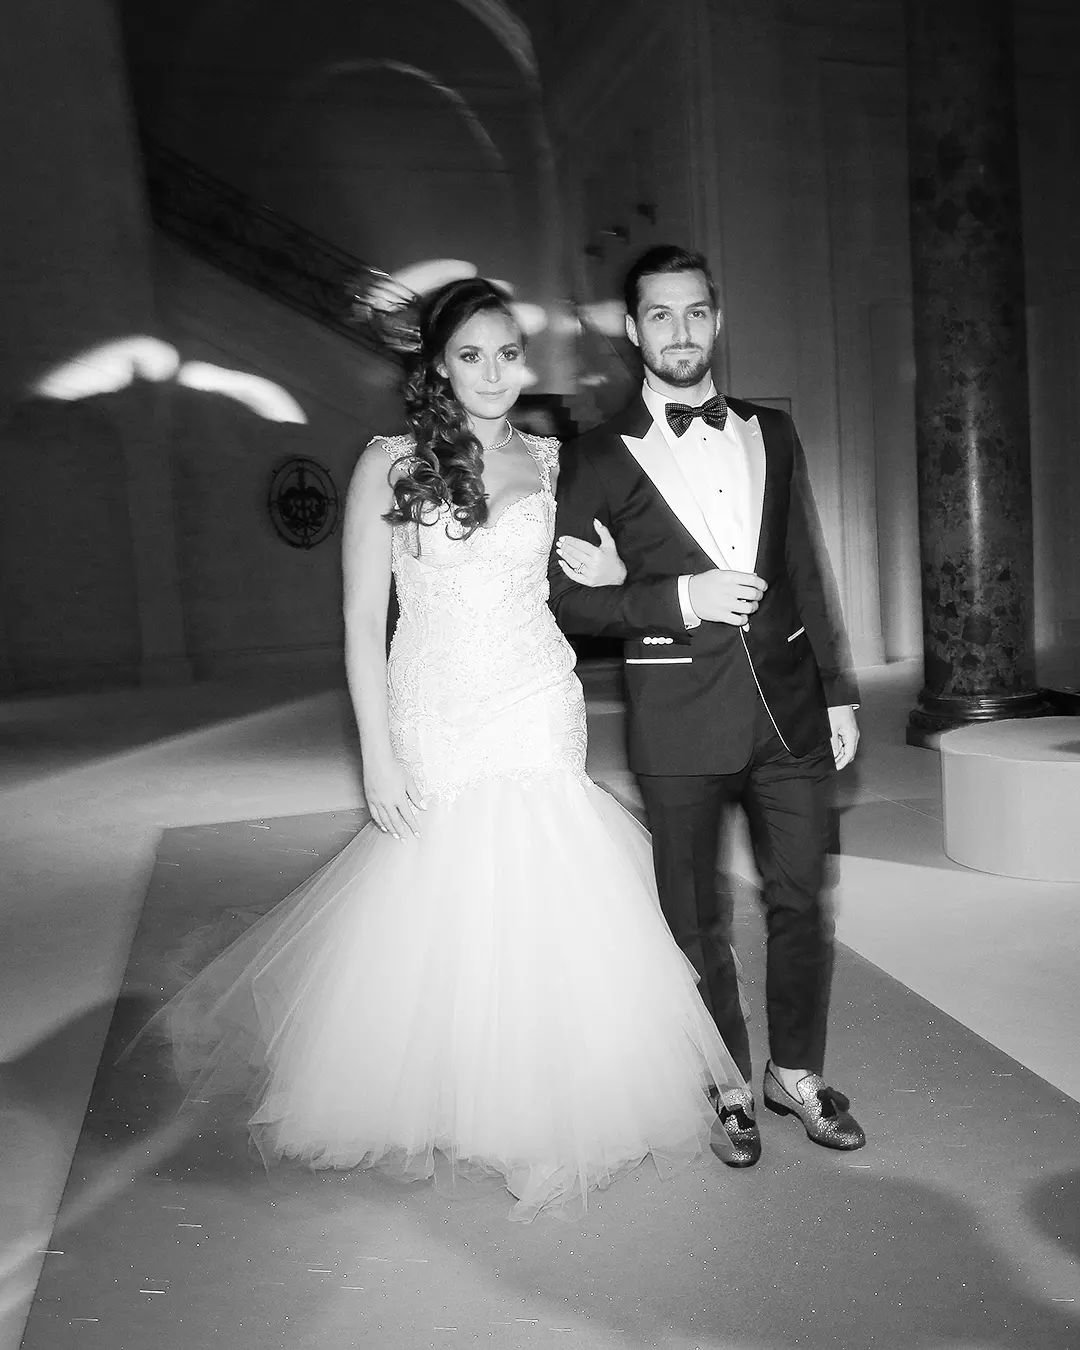 Alexia and Stan captivated the audience with their regal entrance at the illustrious Pavillon Chambon in Paris, radiating an aura of confidence and sophistication. This marked the commencement of an enchanting evening and a crazy party.
.
.
.
.
.
.
.